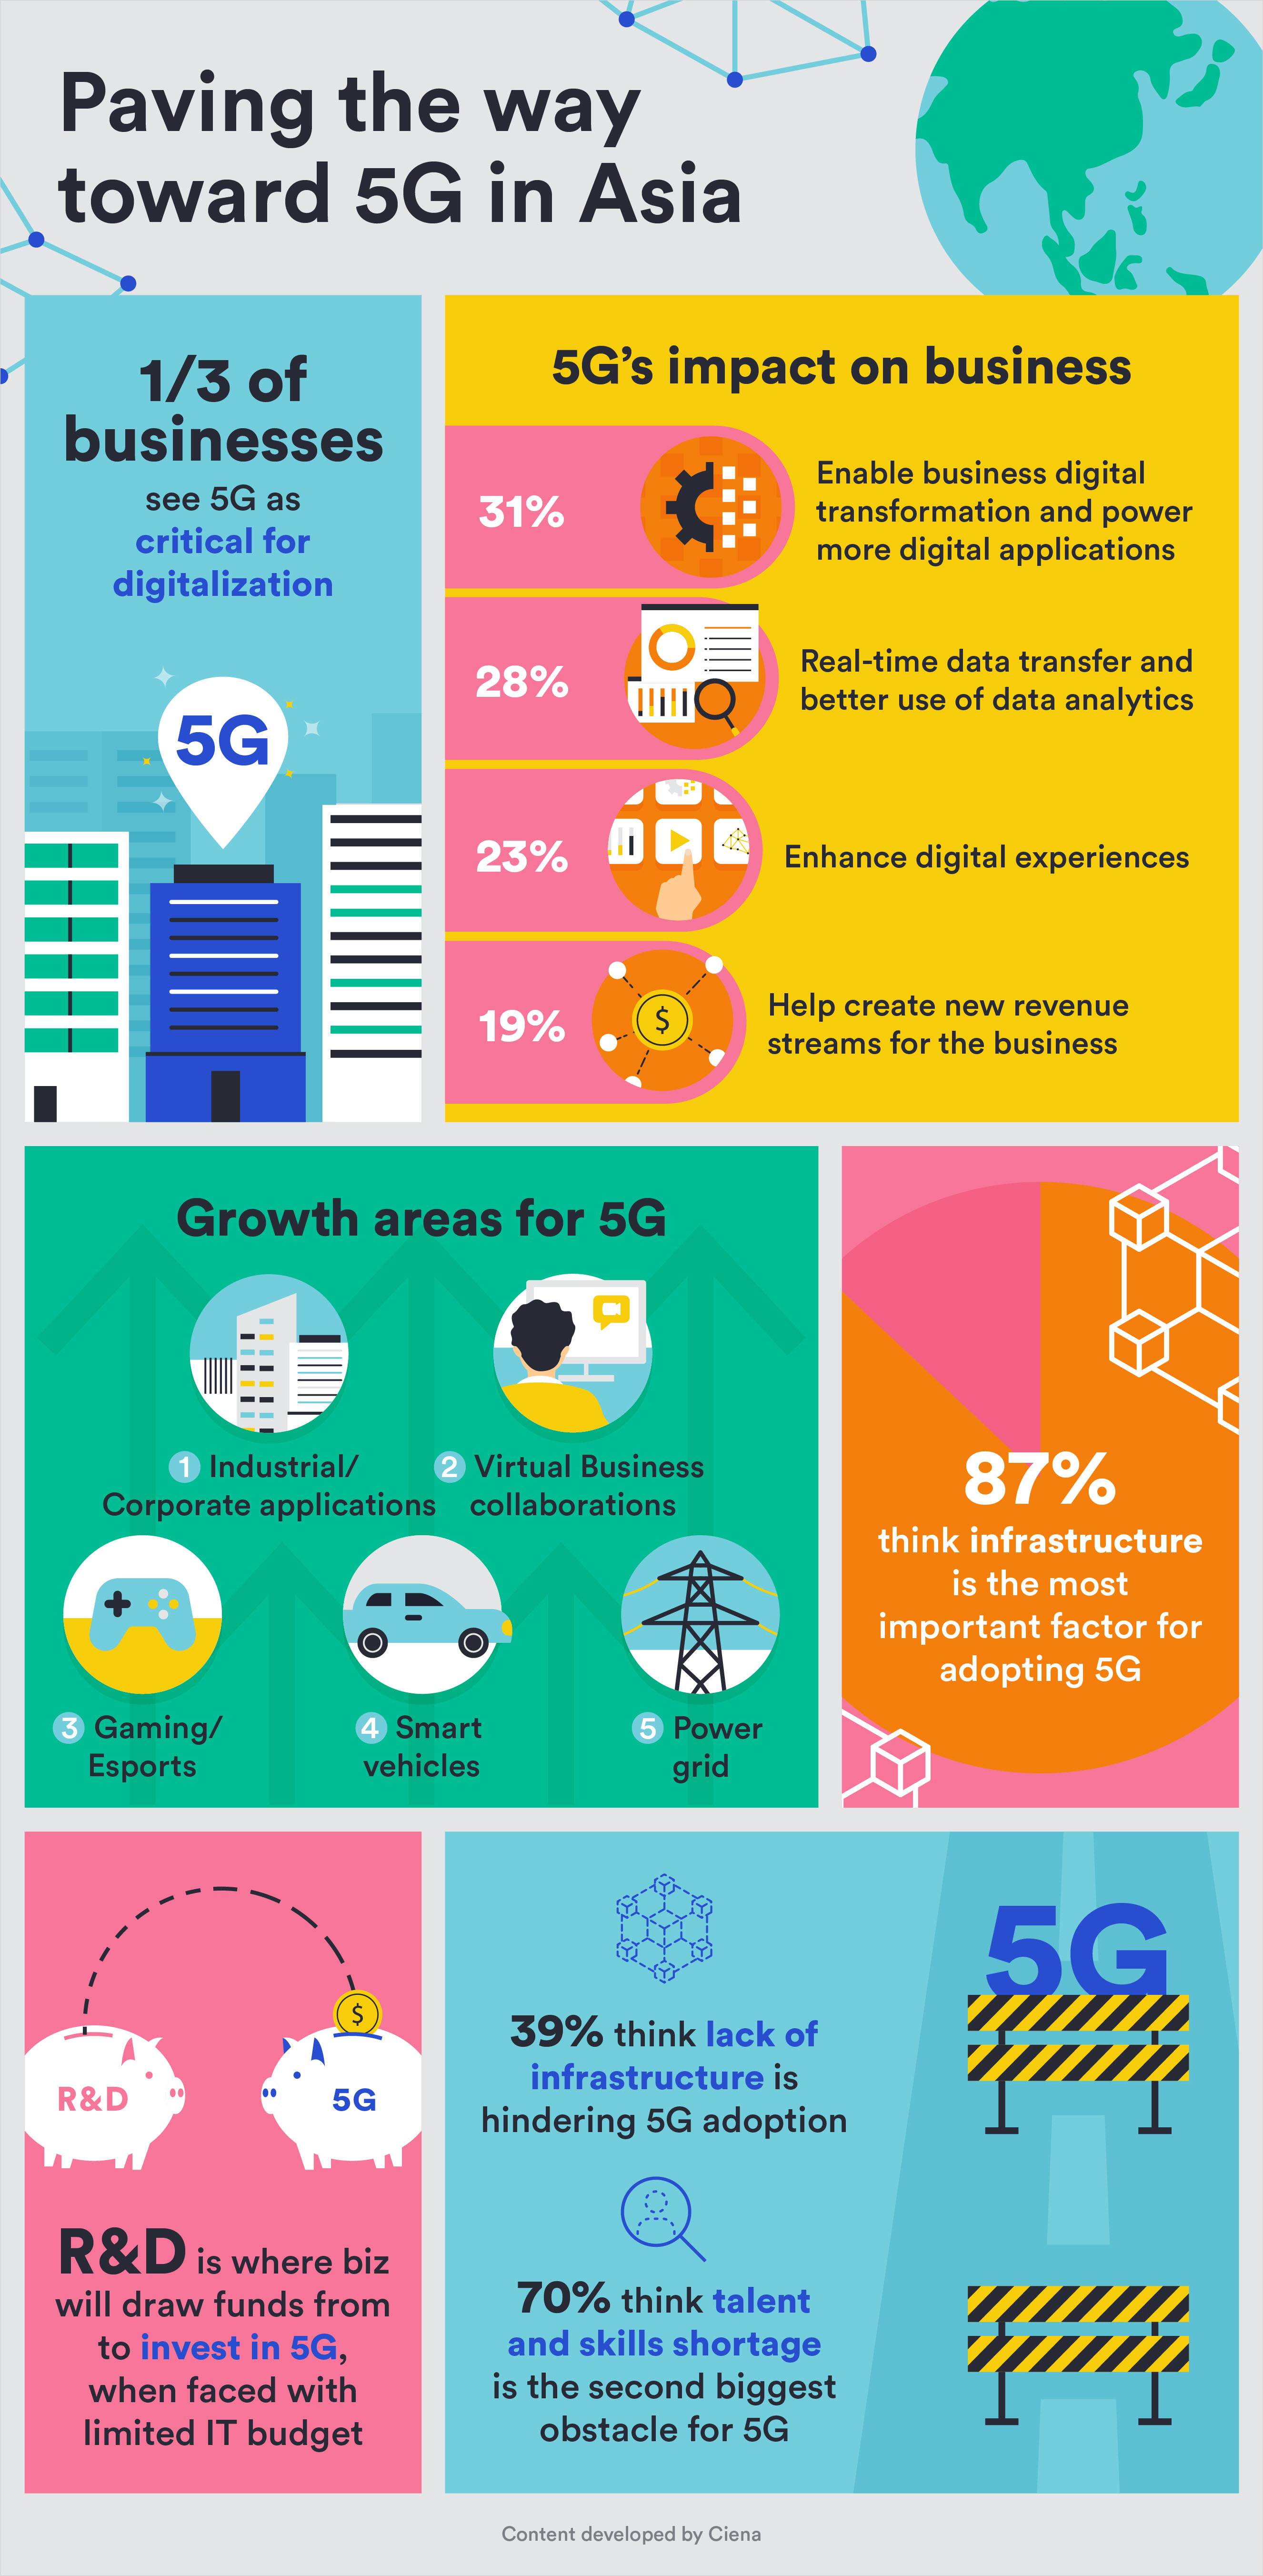 Paving the way toward 5G in Asia infographic